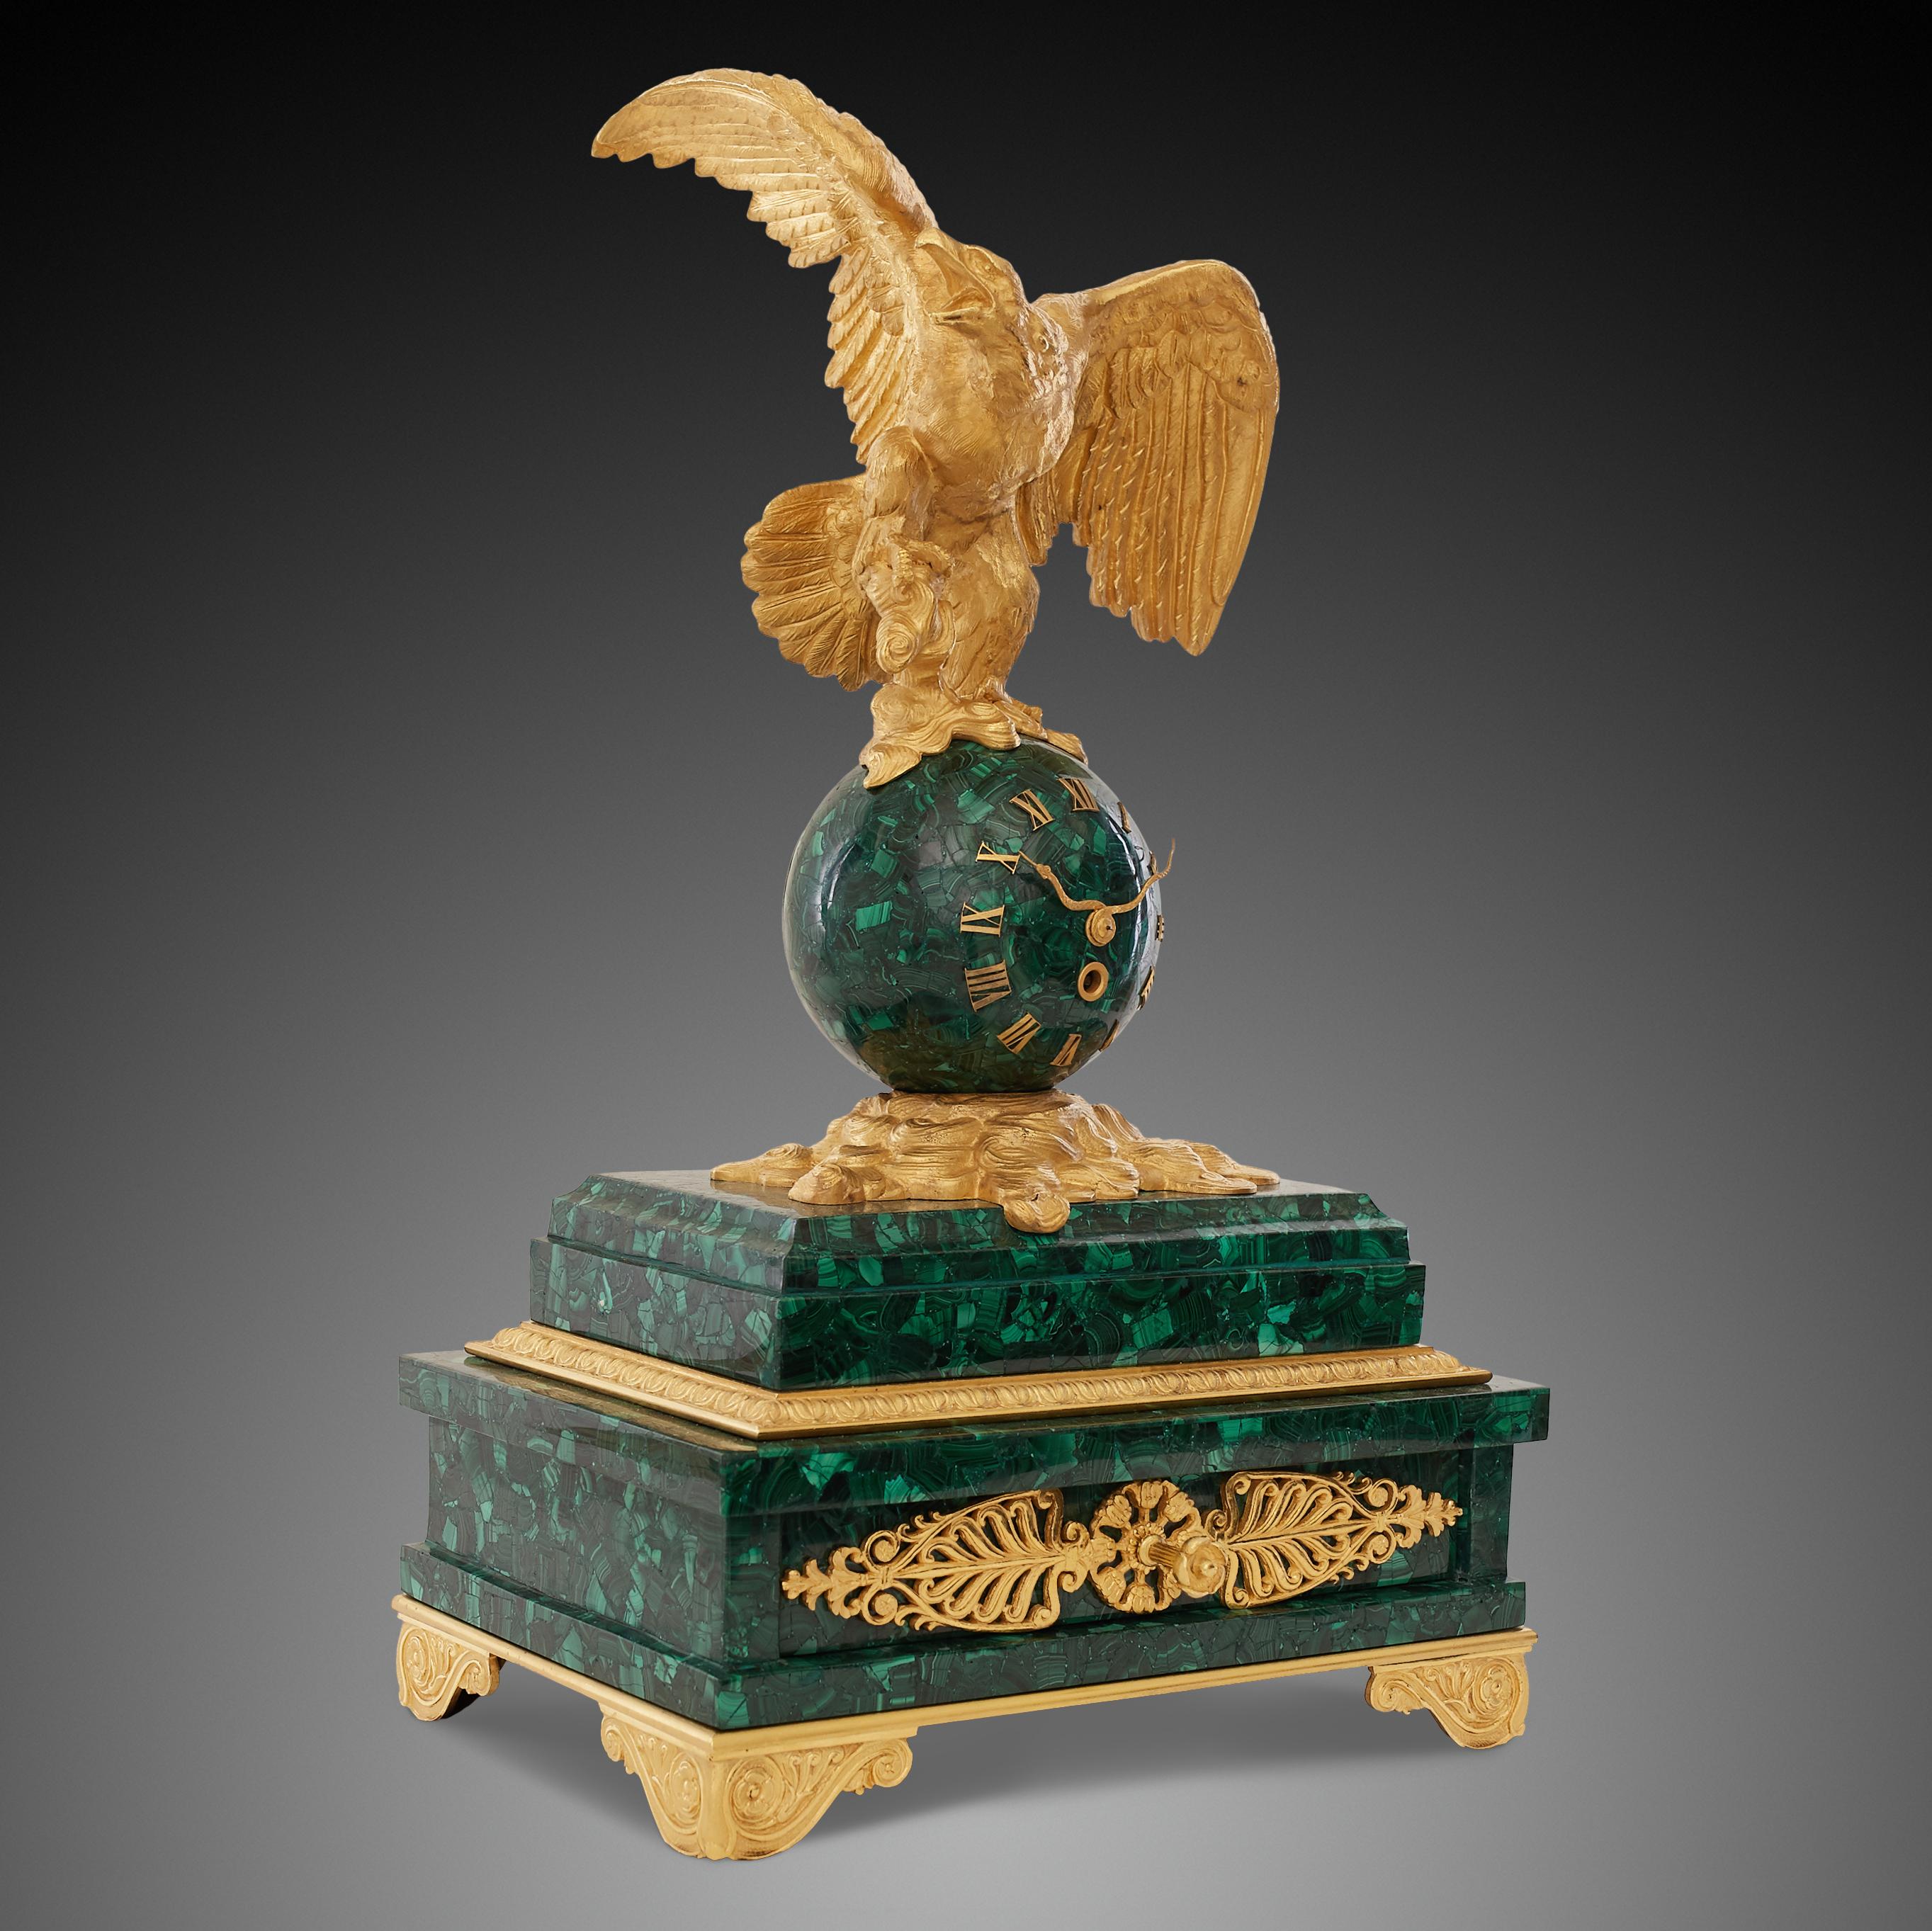 Patriotic French 19th century ormolu bronze eagle standing on a globe malachite mantel clock. The eagle is a symbol of power as well as a recognizable sign of the Empire style. The design of the Empire period was often characterized by militaristic